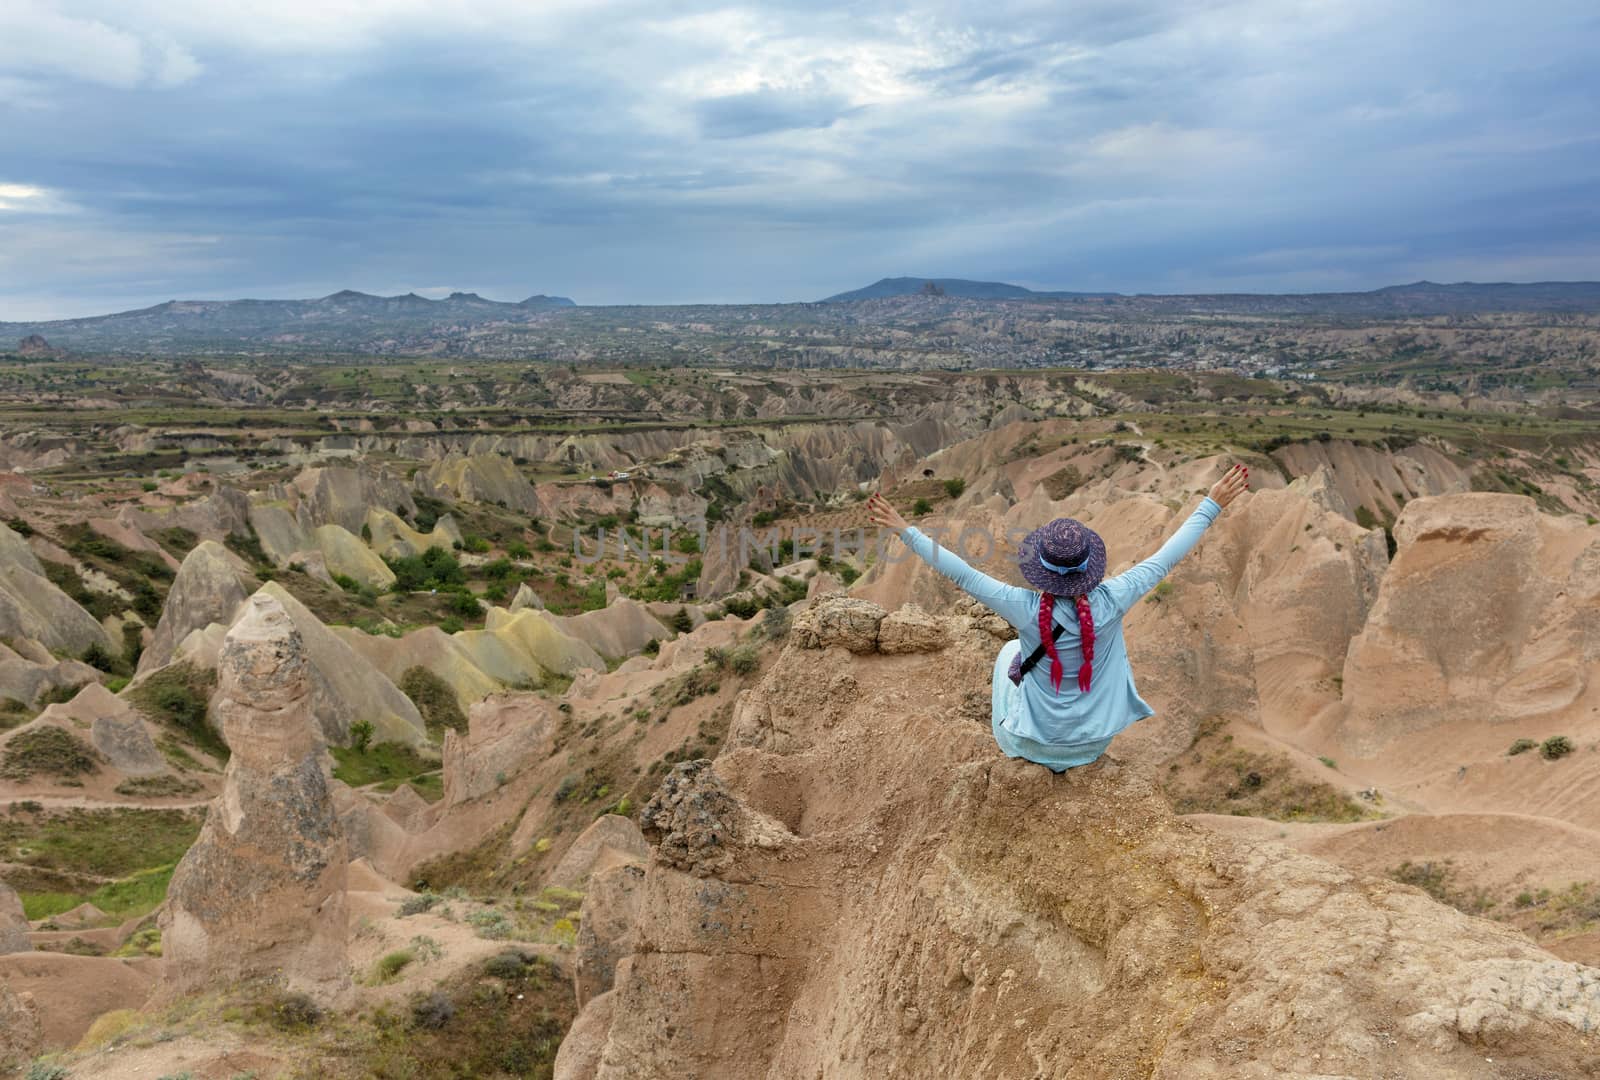 A young girl in turquoise clothes sits on top of a rock in Cappadocia and looks spread her arms out on mountains, ravines and a blue sky.